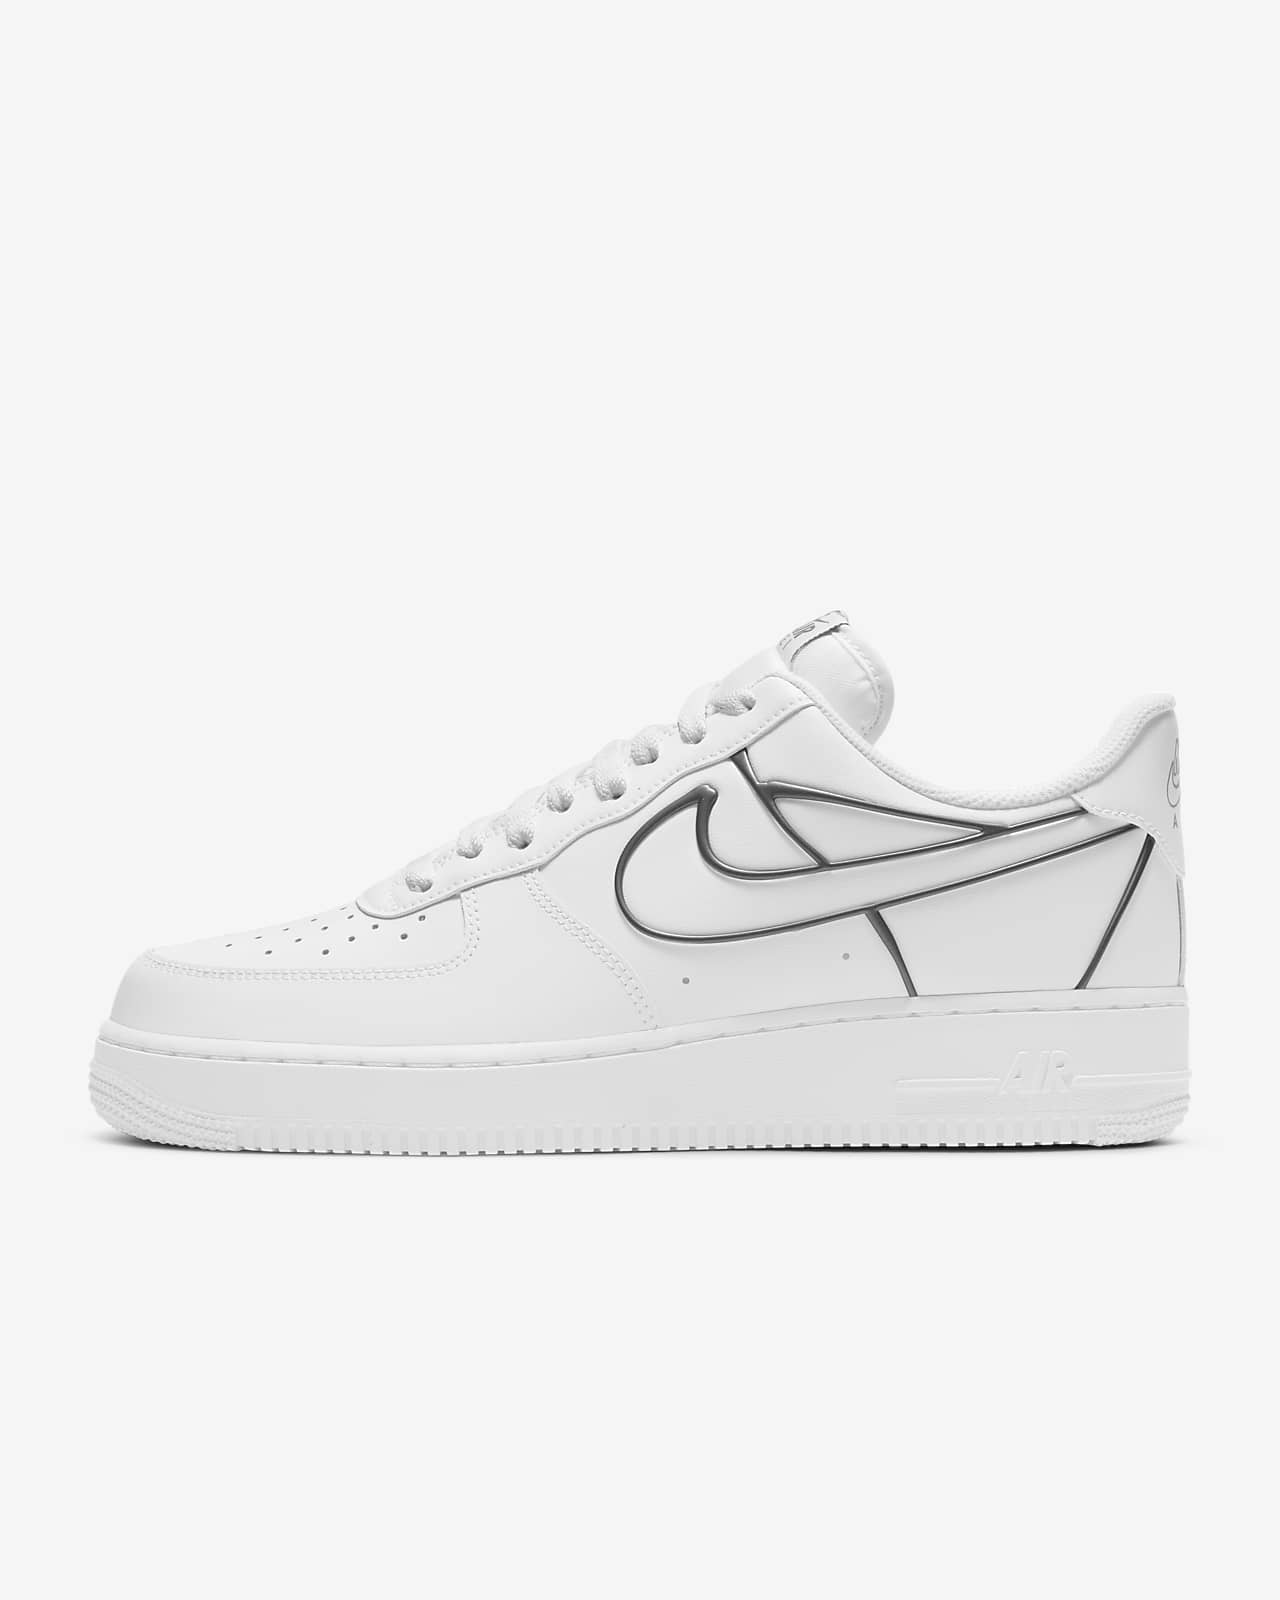 Chaussure Nike Air Force 1 pour Homme